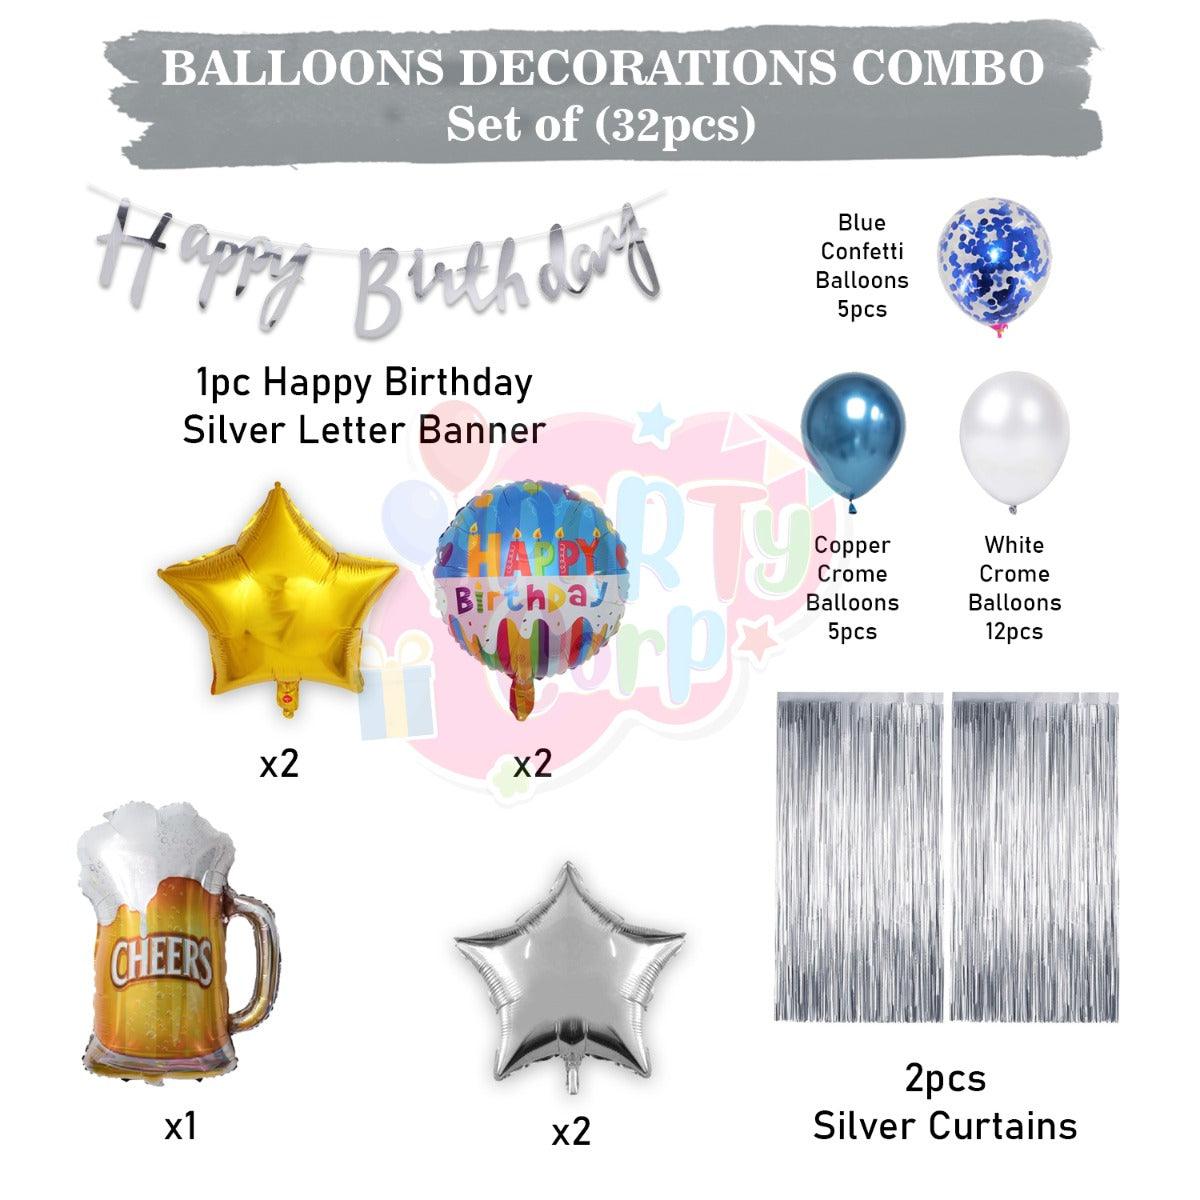 PartyCorp Happy Birthday Decoration Kit Combo 33 Pcs - Blue & White Chrome & Confetti Balloons, Silver Happy Birthday Banner, Silver Curtain, Silver Star Foil, Cheers Beer Mug Foil Balloons